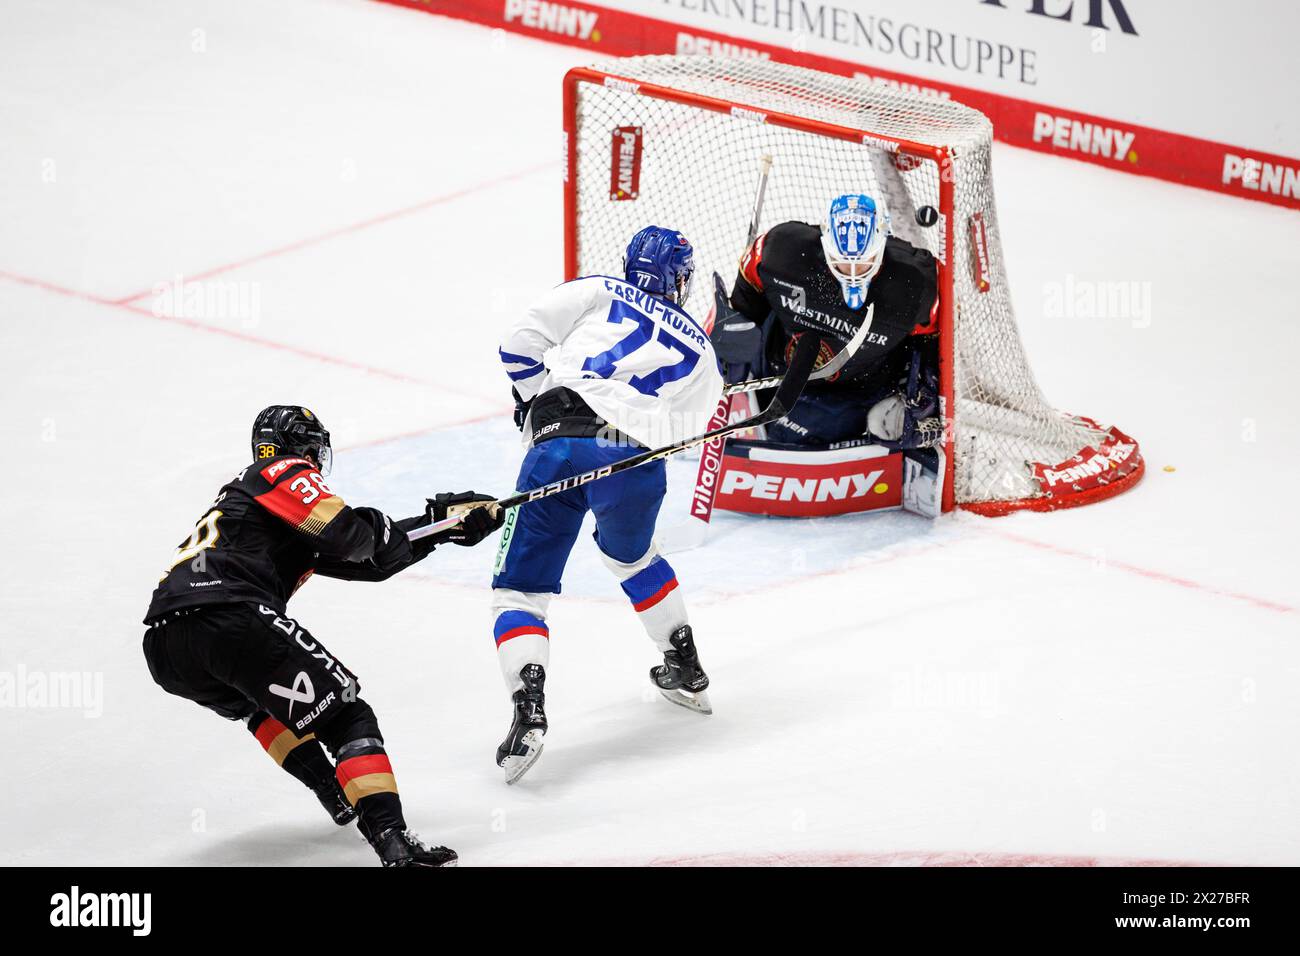 Augsburg, Germany. 20th Apr, 2024. Ice hockey: International match, Germany - Slovakia in the Curt-Frenzel-Stadium. Martin Fasko-Rudas of Slovakia (M) scores to make it 4:5. Goalkeeper Florian Bugl of Germany (r) is unable to keep the puck out. Fabio Wagner of Germany defends on the left. Credit: Matthias Balk/dpa/Alamy Live News Stock Photo